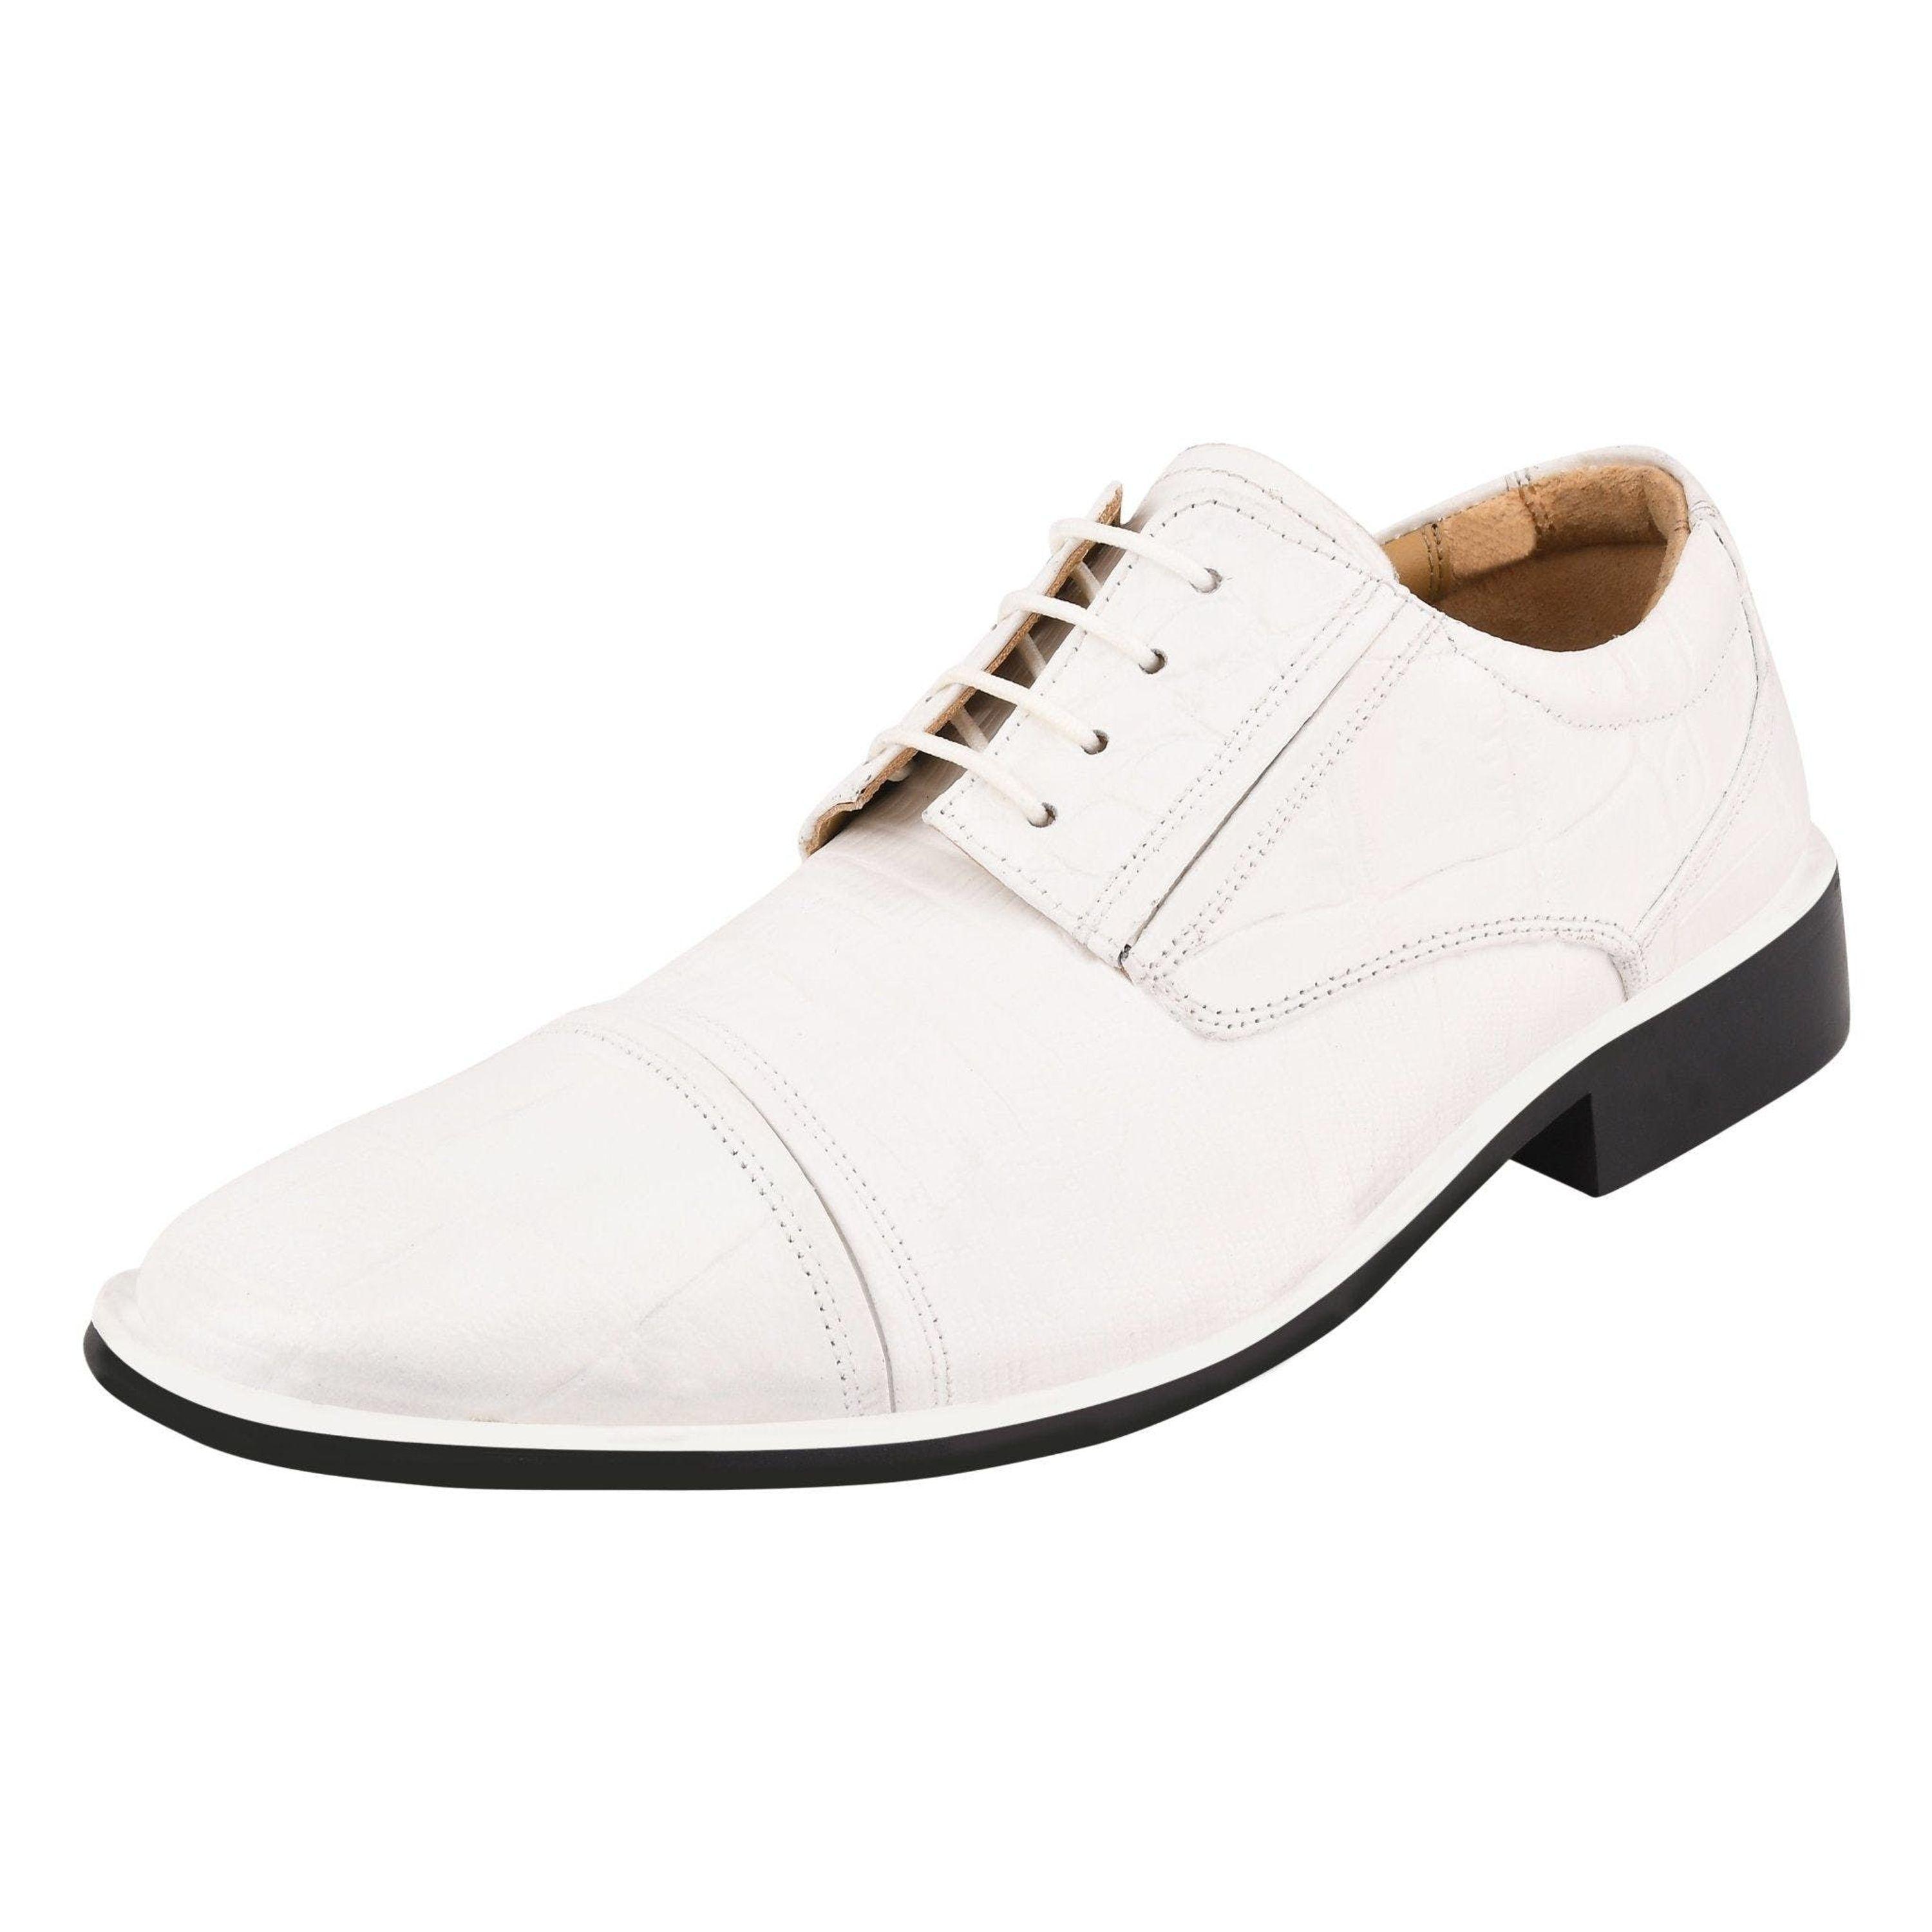 Boyka Leather Red and White Oxford Dress Shoes with Red Bottom